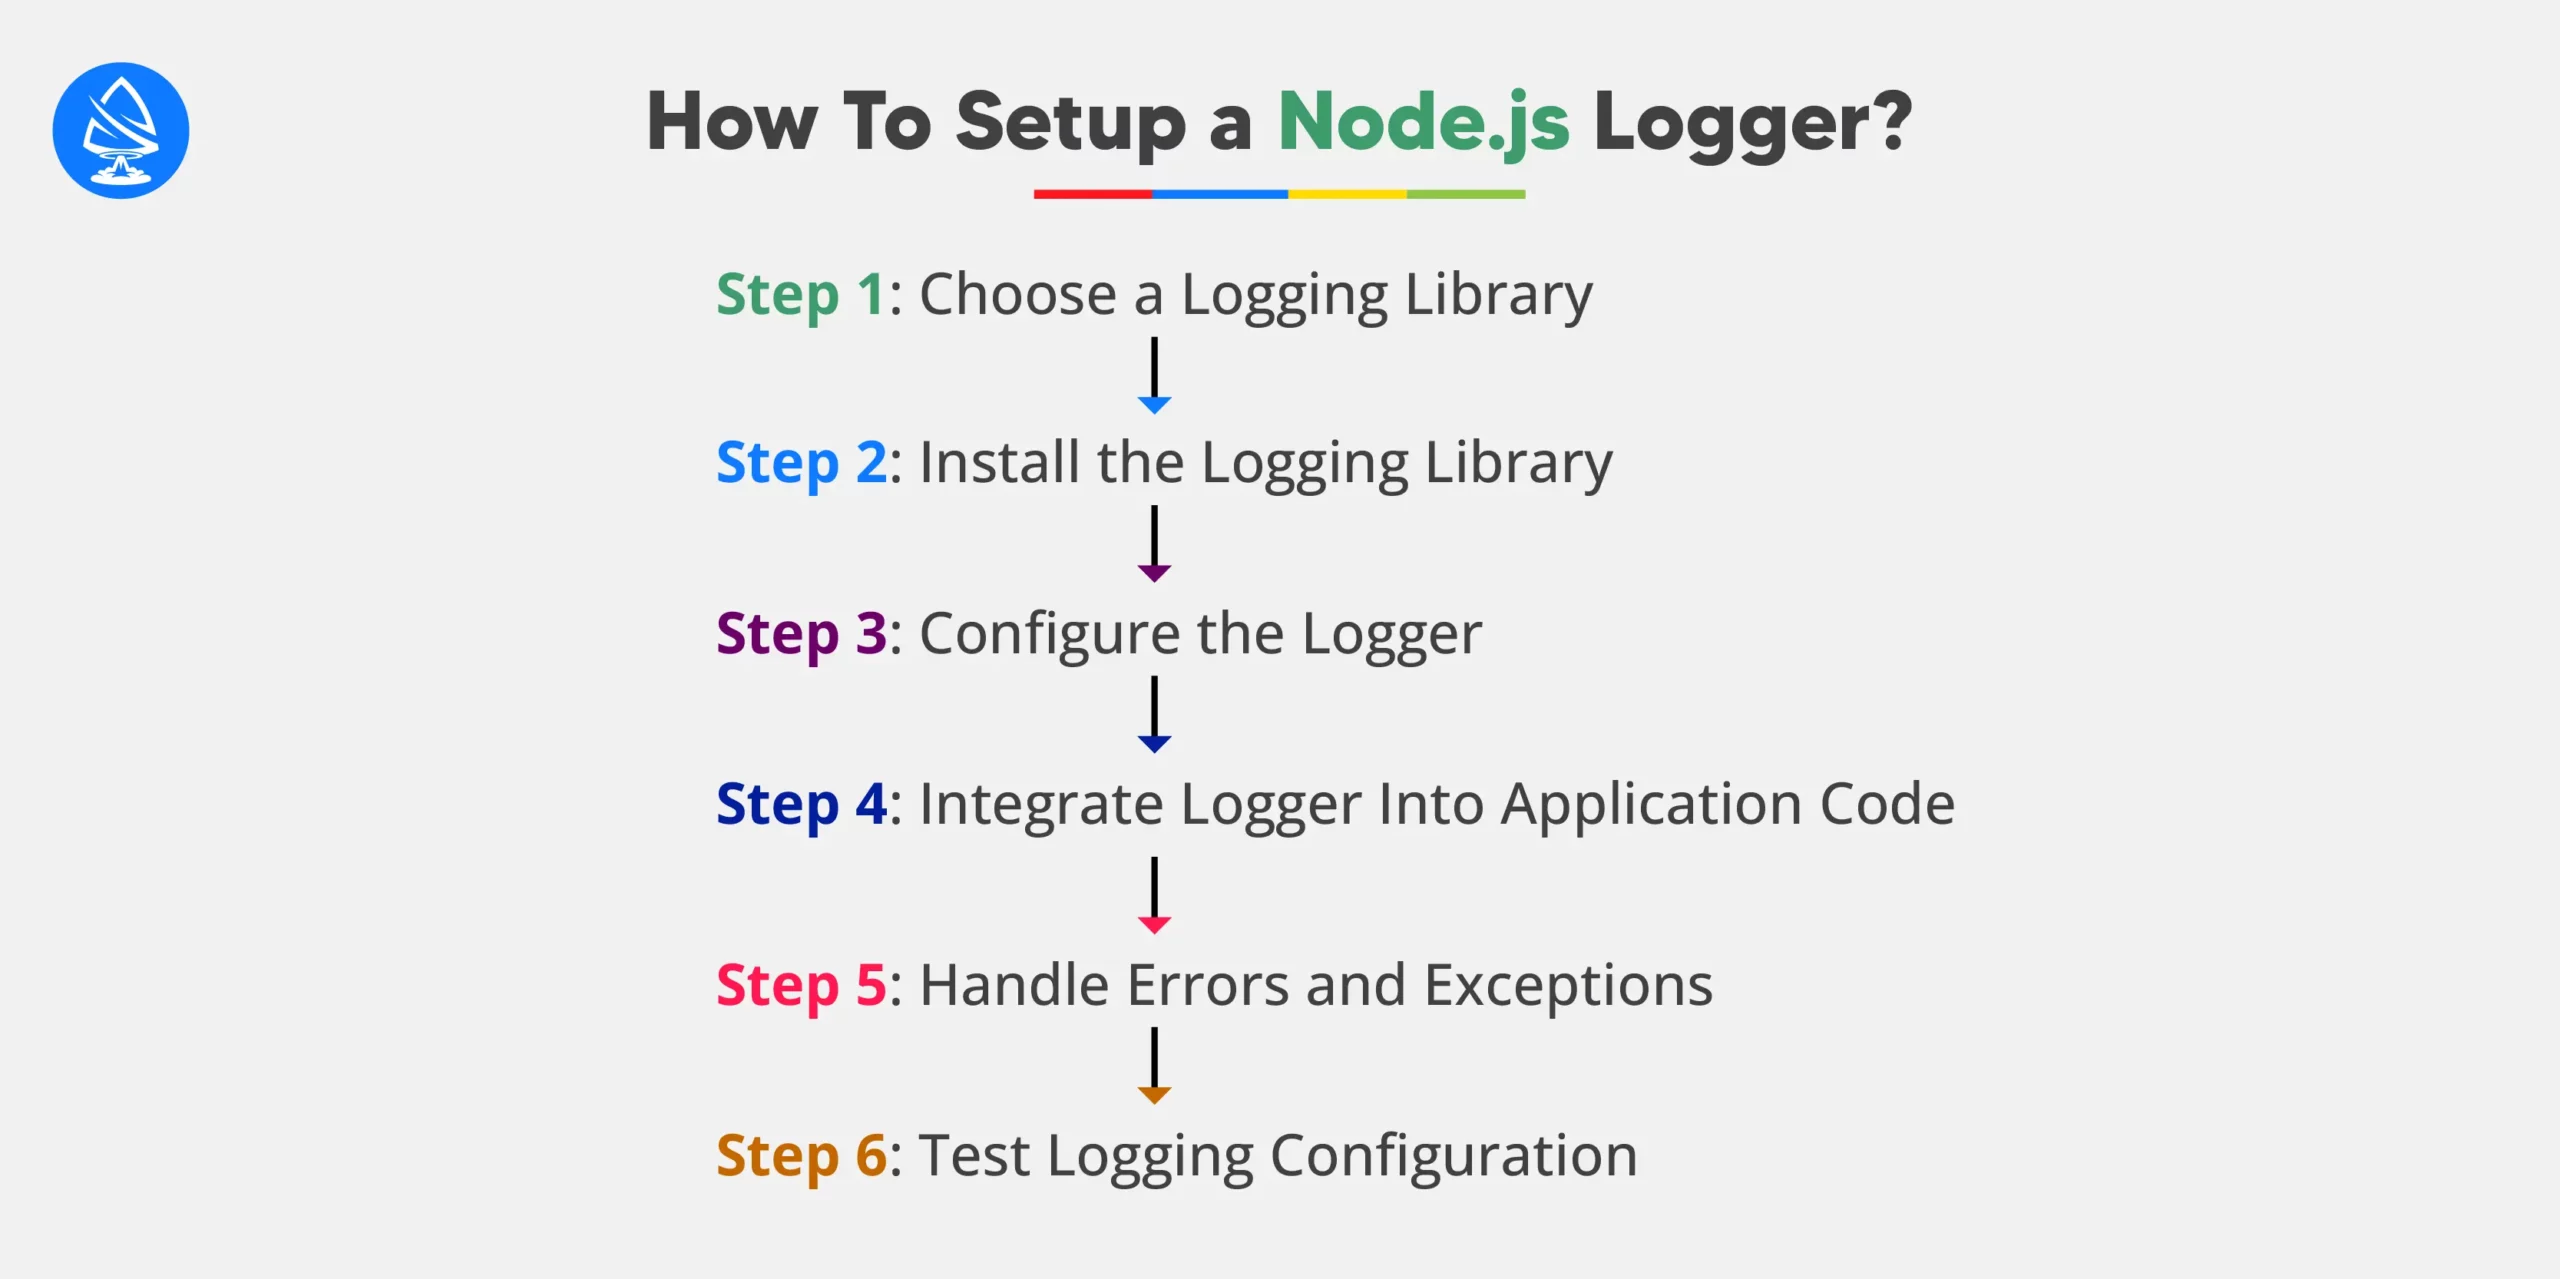 Here is a quick look at the steps involved in setting up a Node.js logger 